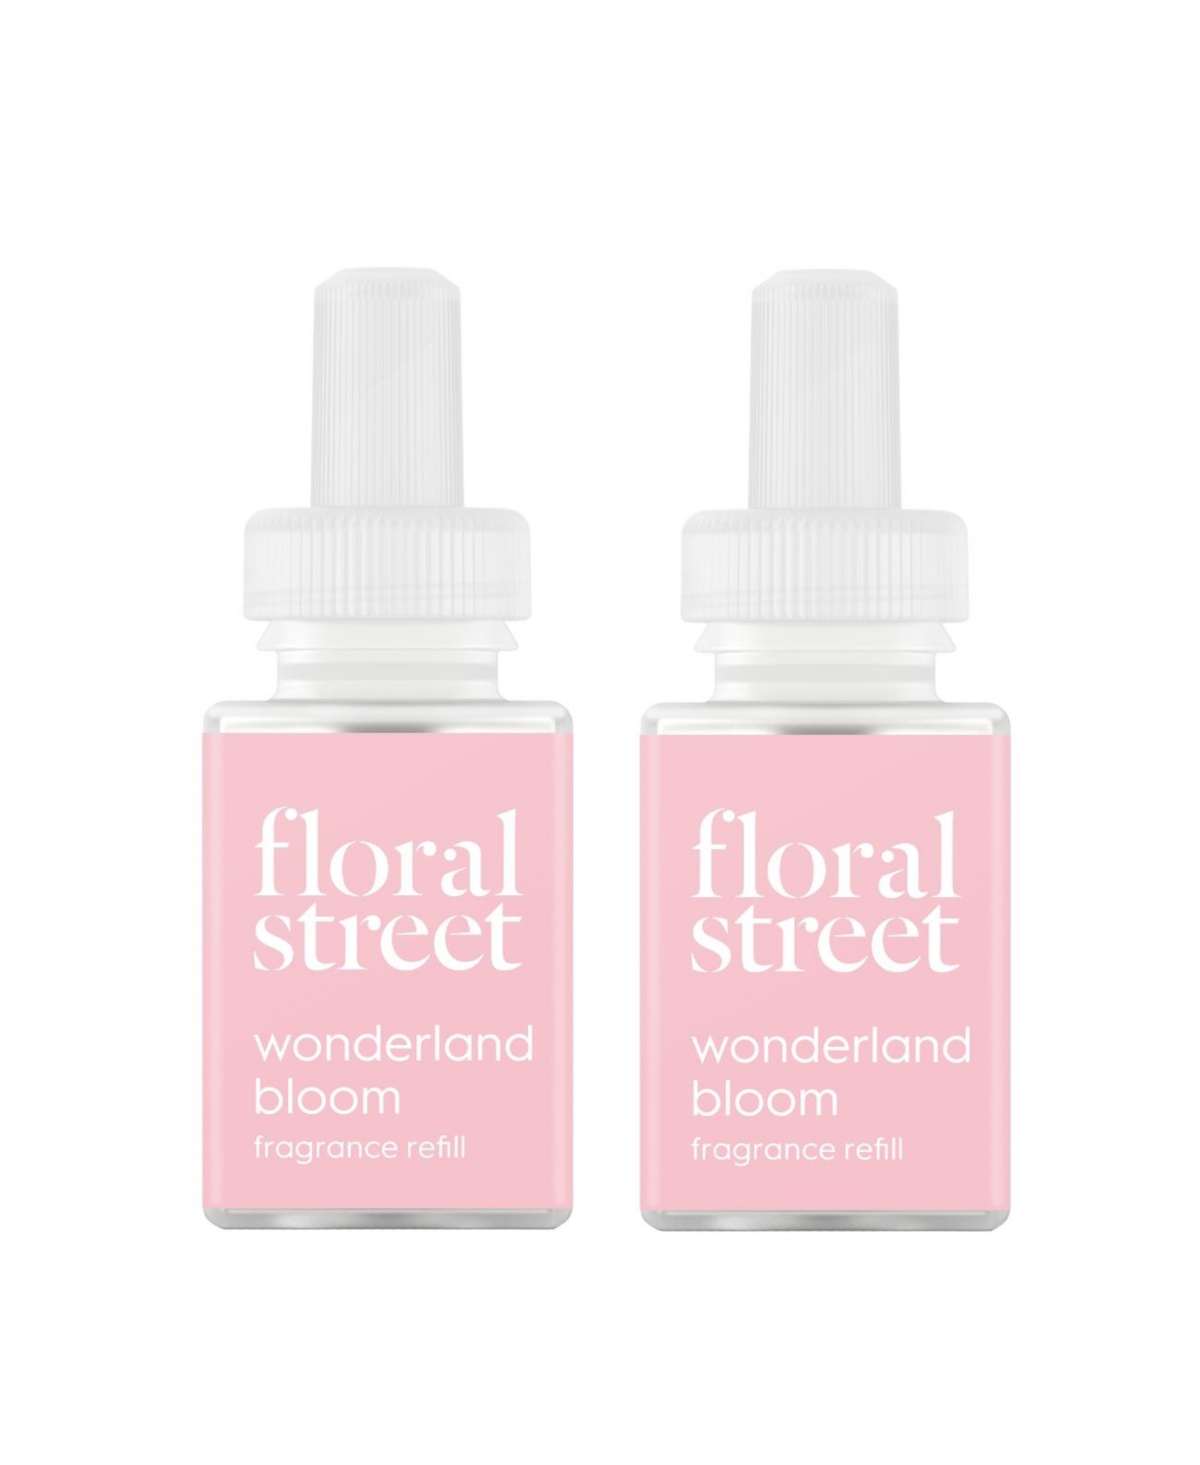 and Floral Street - Wonderland Bloom - Fragrance for Smart Home Air Diffusers - Room Freshener - Aromatherapy Scents for Bedrooms & Living Rooms